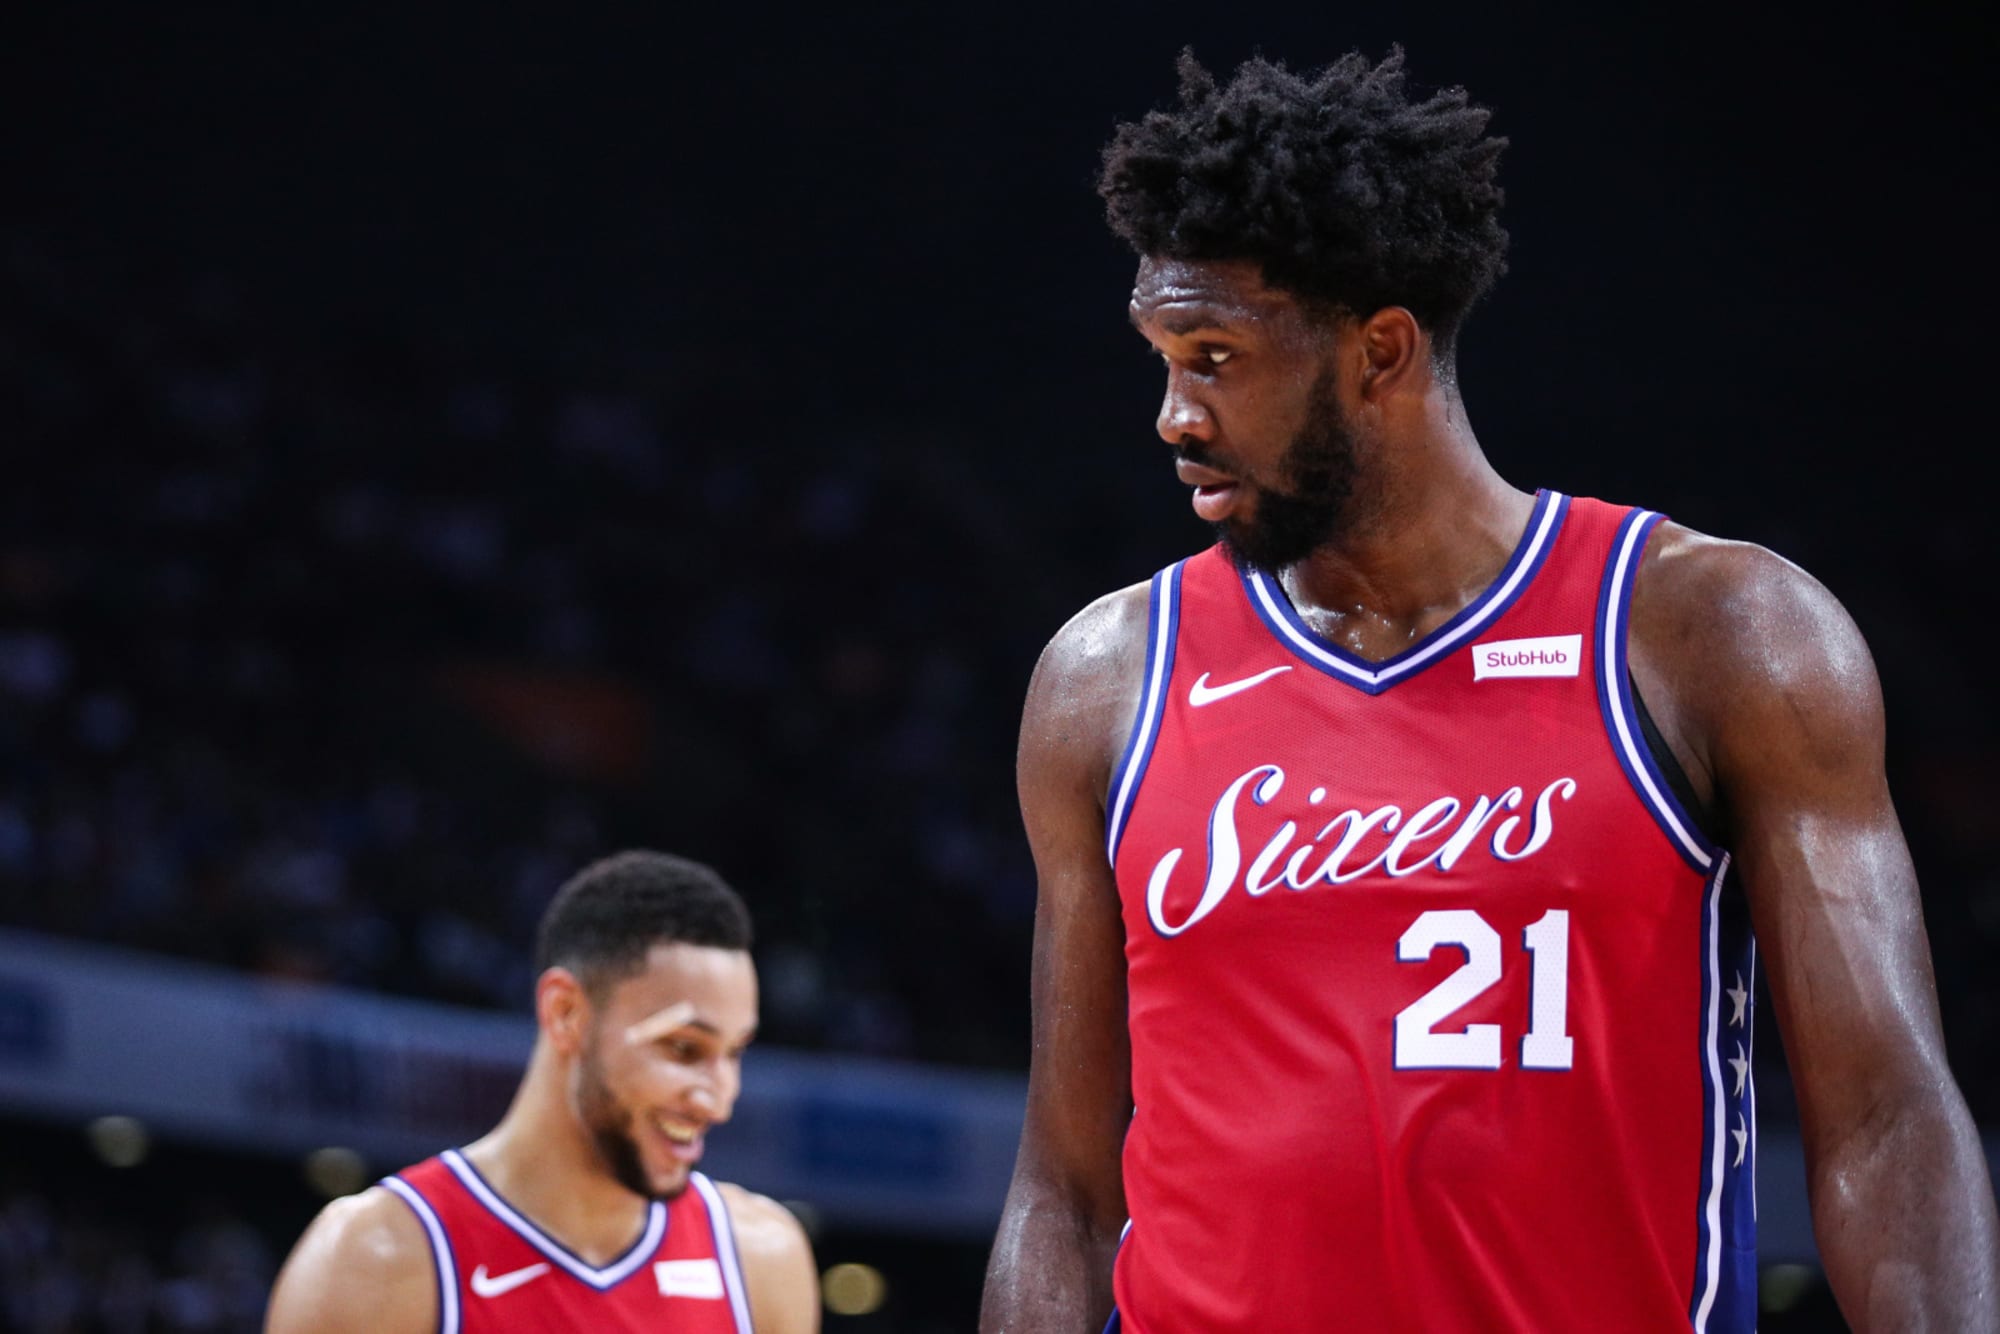 Sixers finalize roster on eve of 2019-20 opener with Celtics